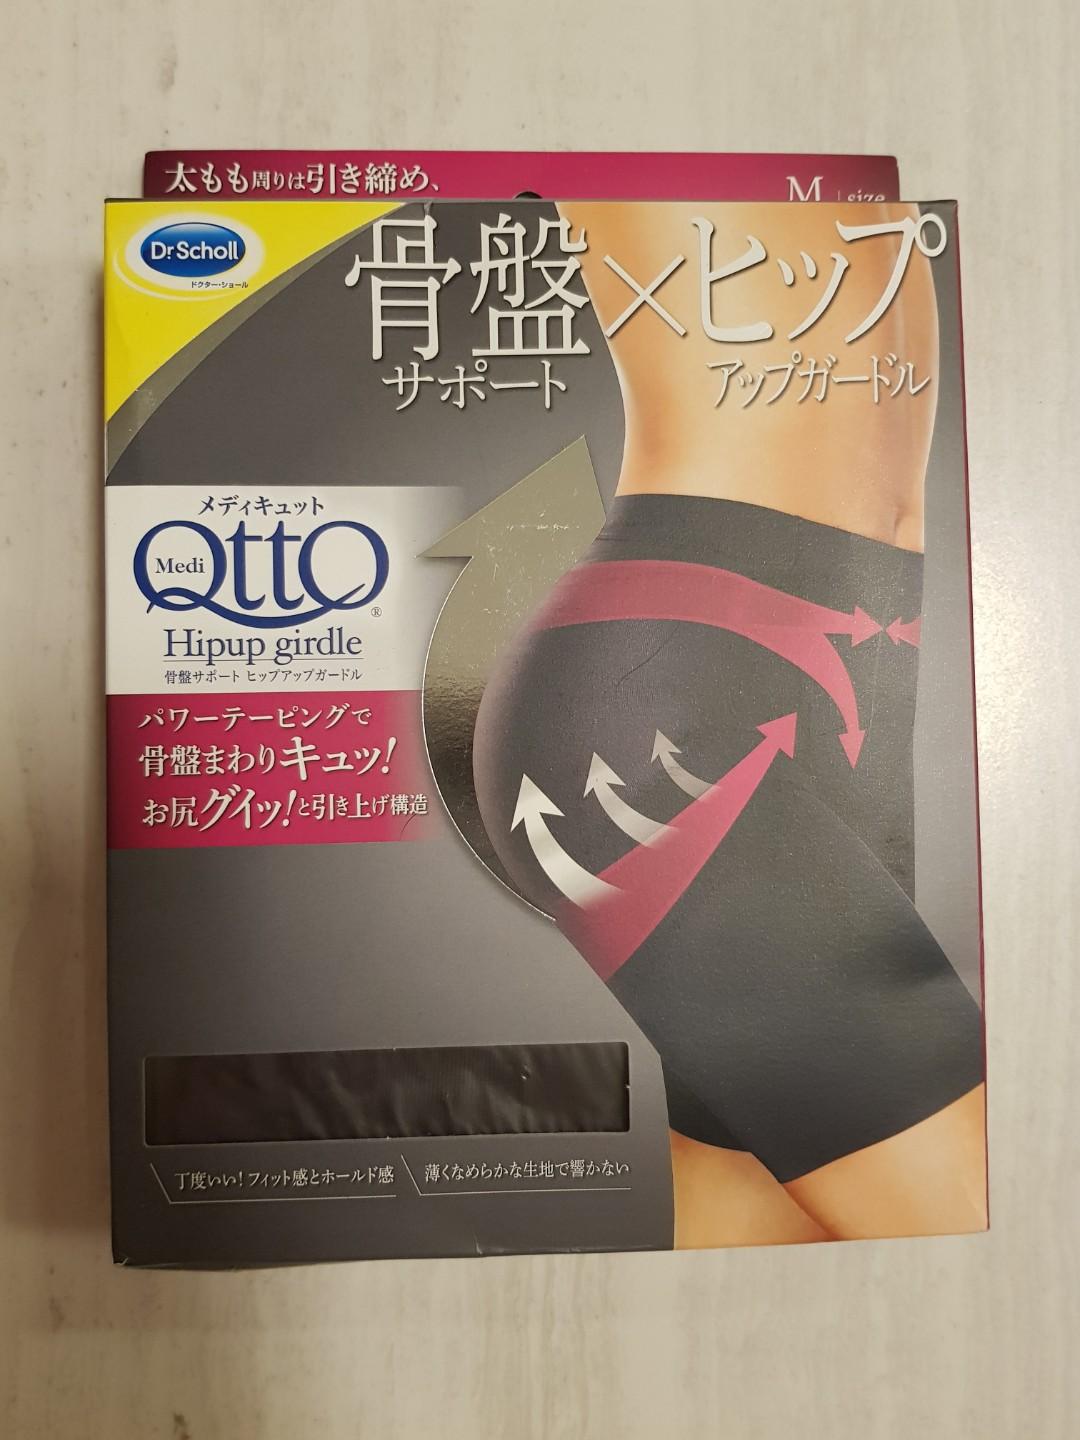 dr scholl's knee support